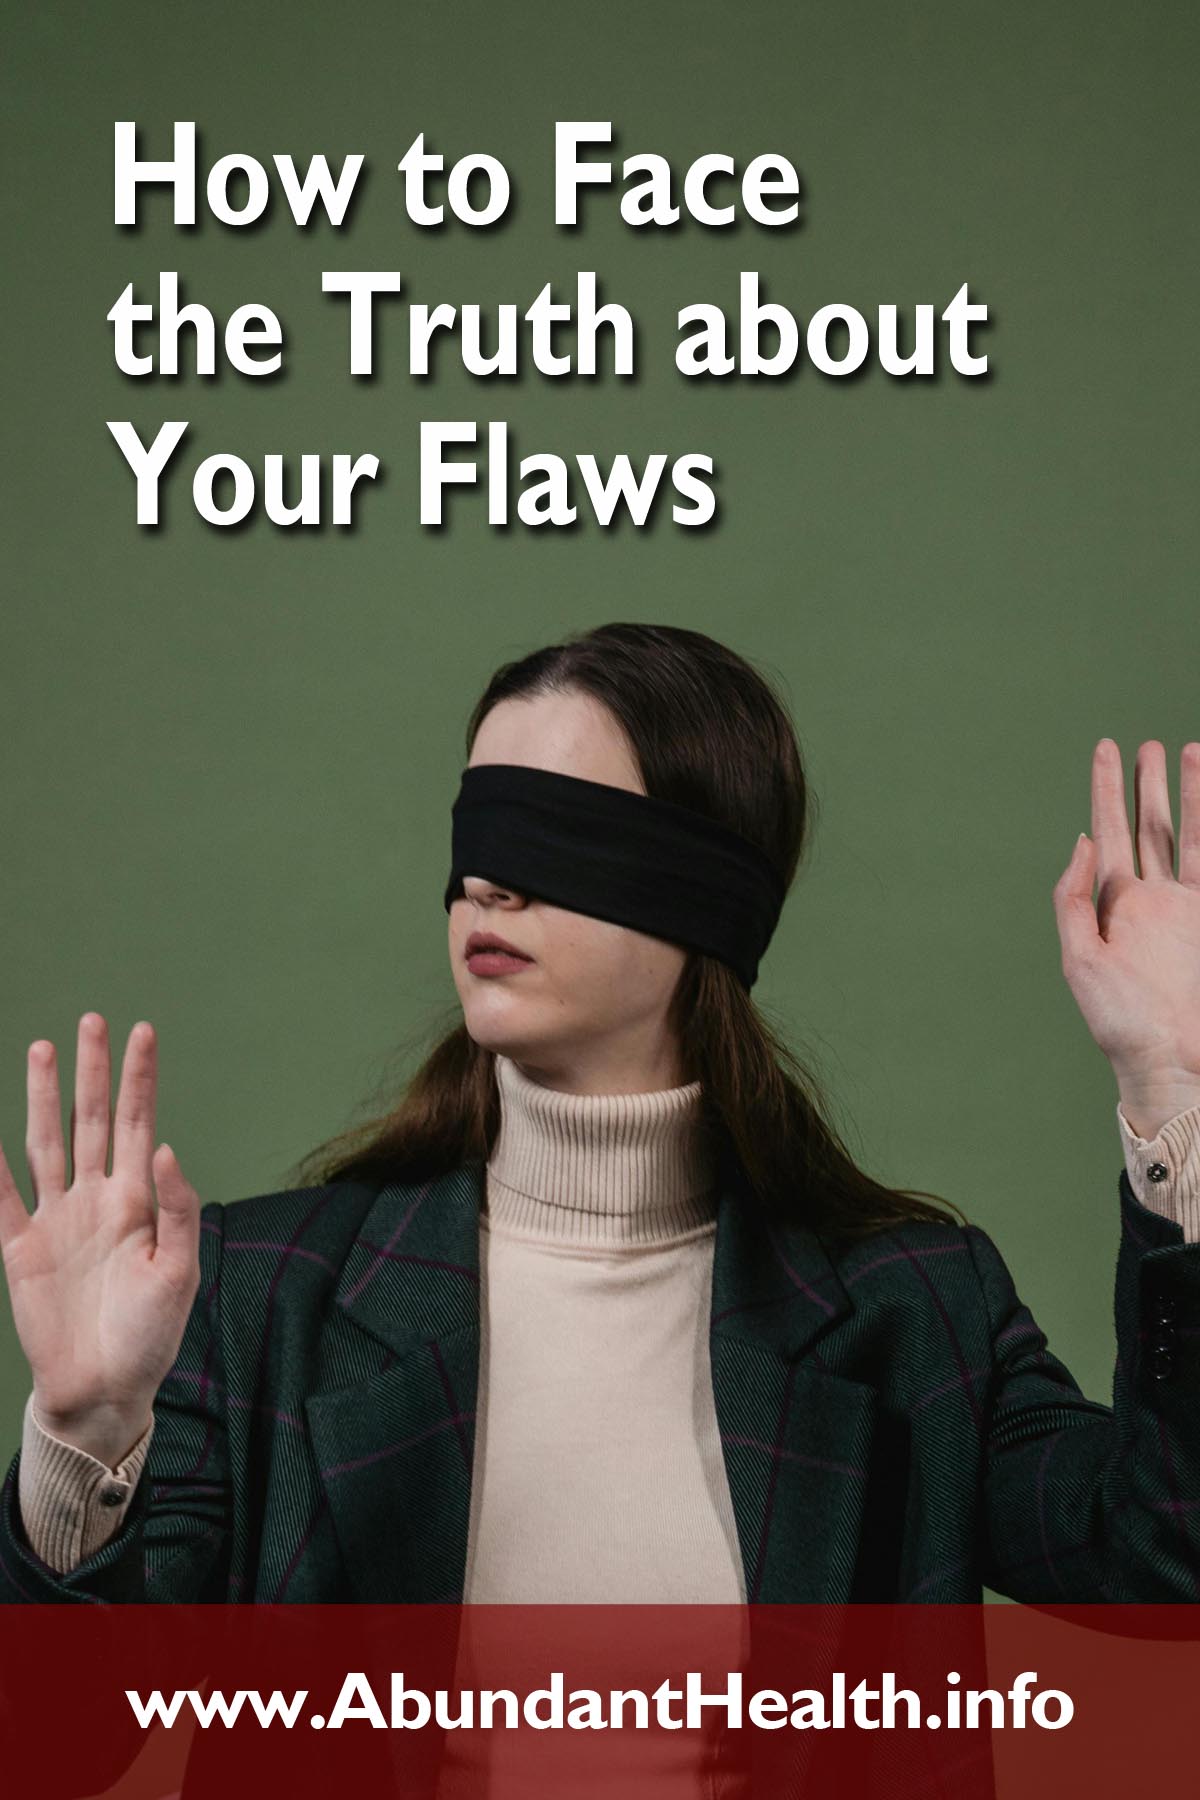 How to Face the Truth about Your Flaws